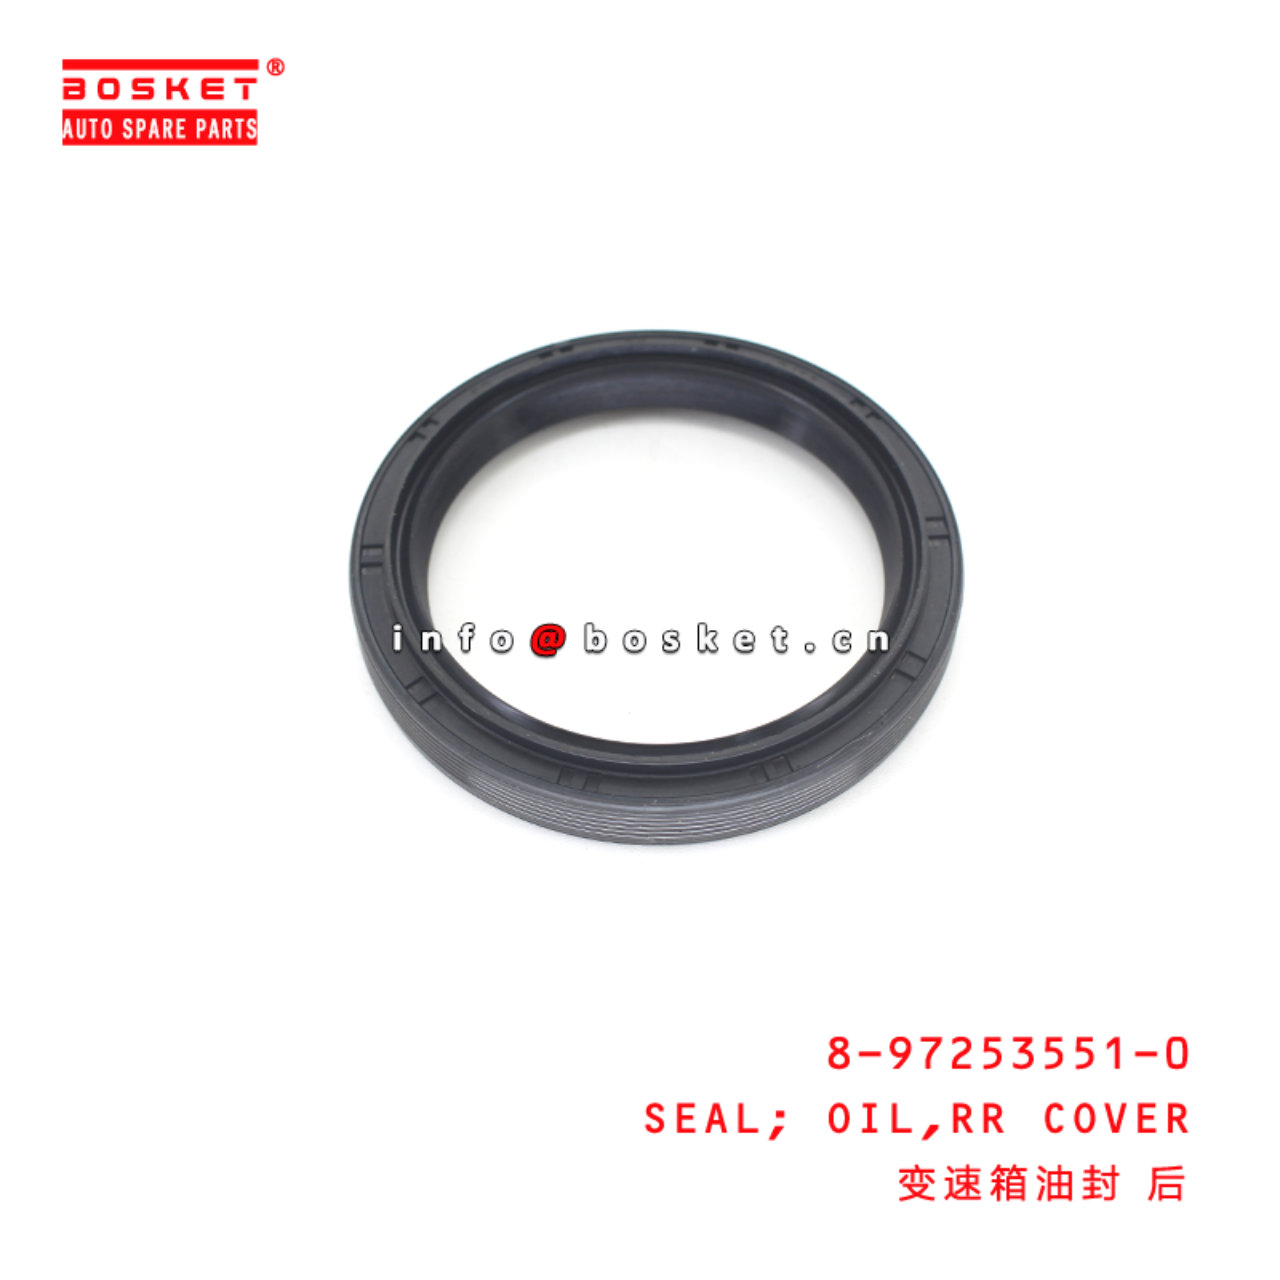 8-97253551-0 Rear Cover Oil Seal suitable for ISUZU NQR90 MZZ6U 8972535510